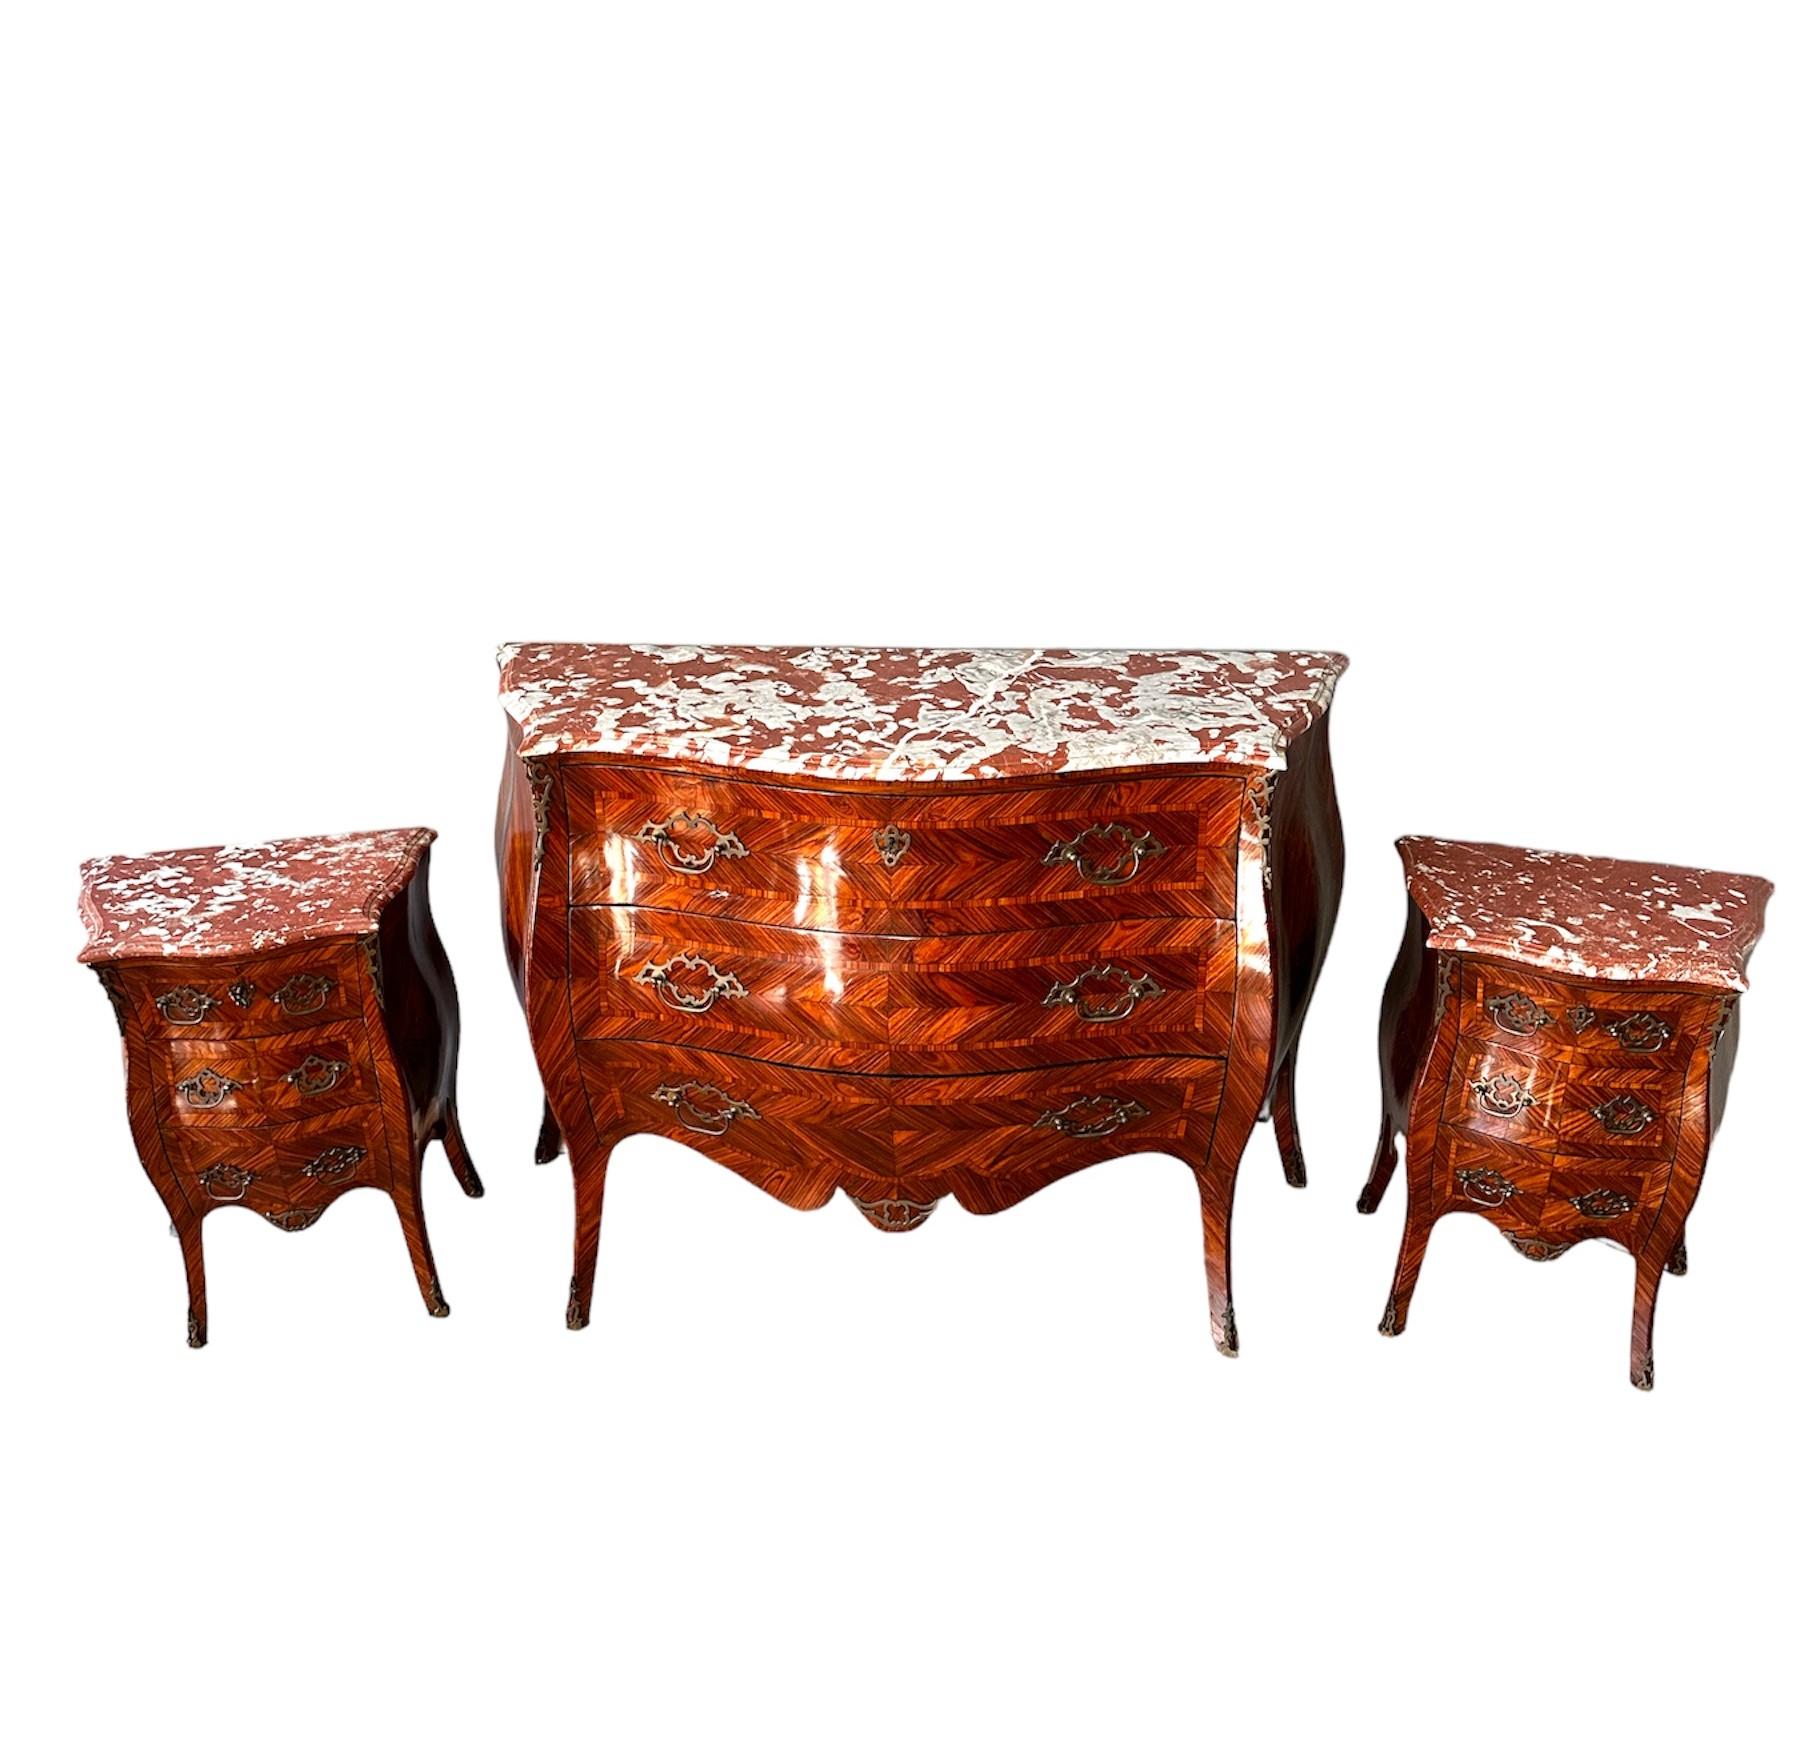 Sicilian 19th century, Napoleon III, Dresser and two nightstands in ebony and marble For Sale